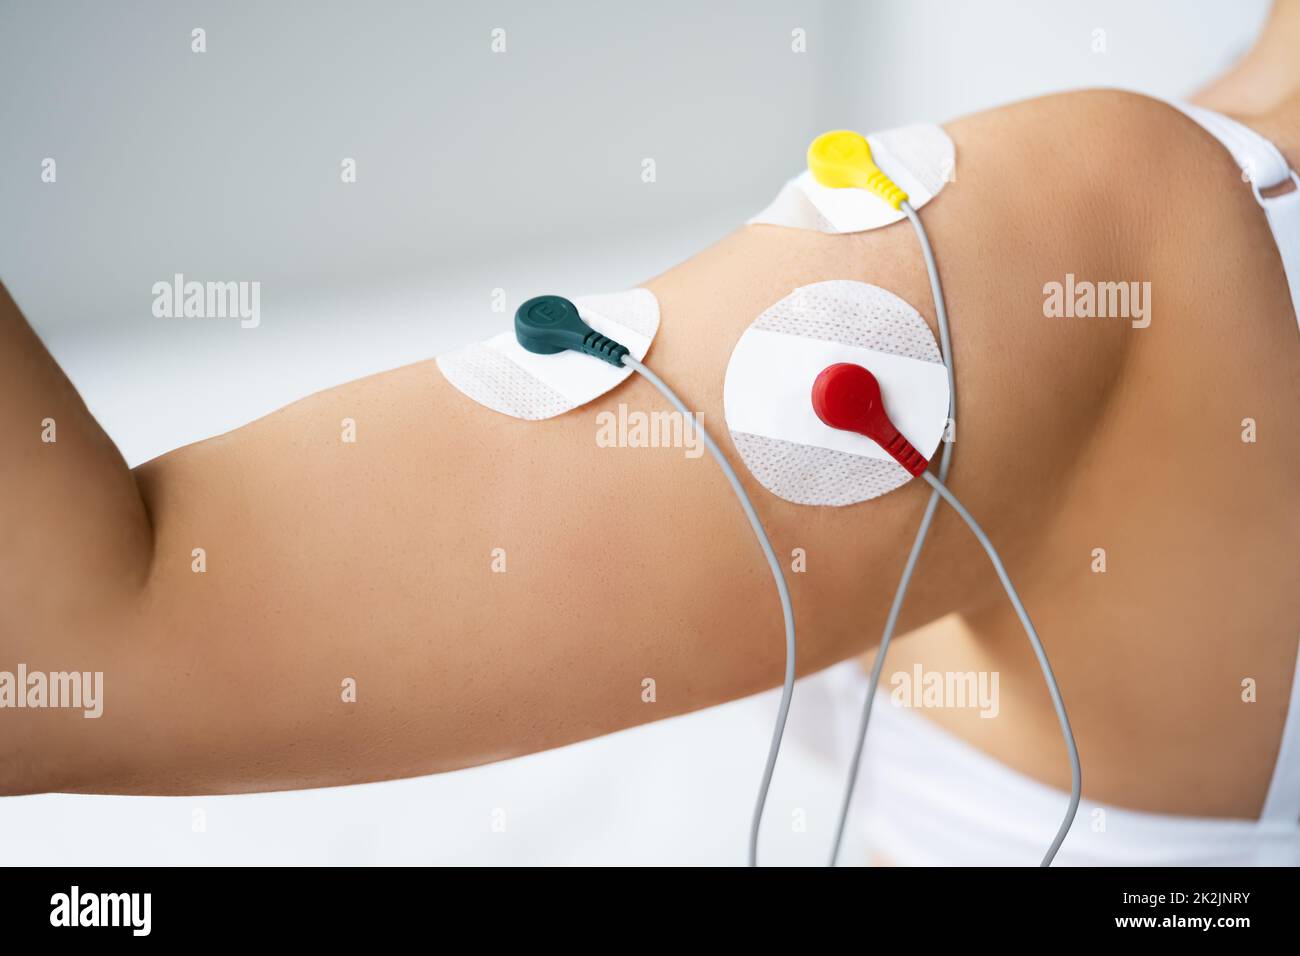 Electrode Arm Stimulation And Training. Pain Therapy Stock Photo